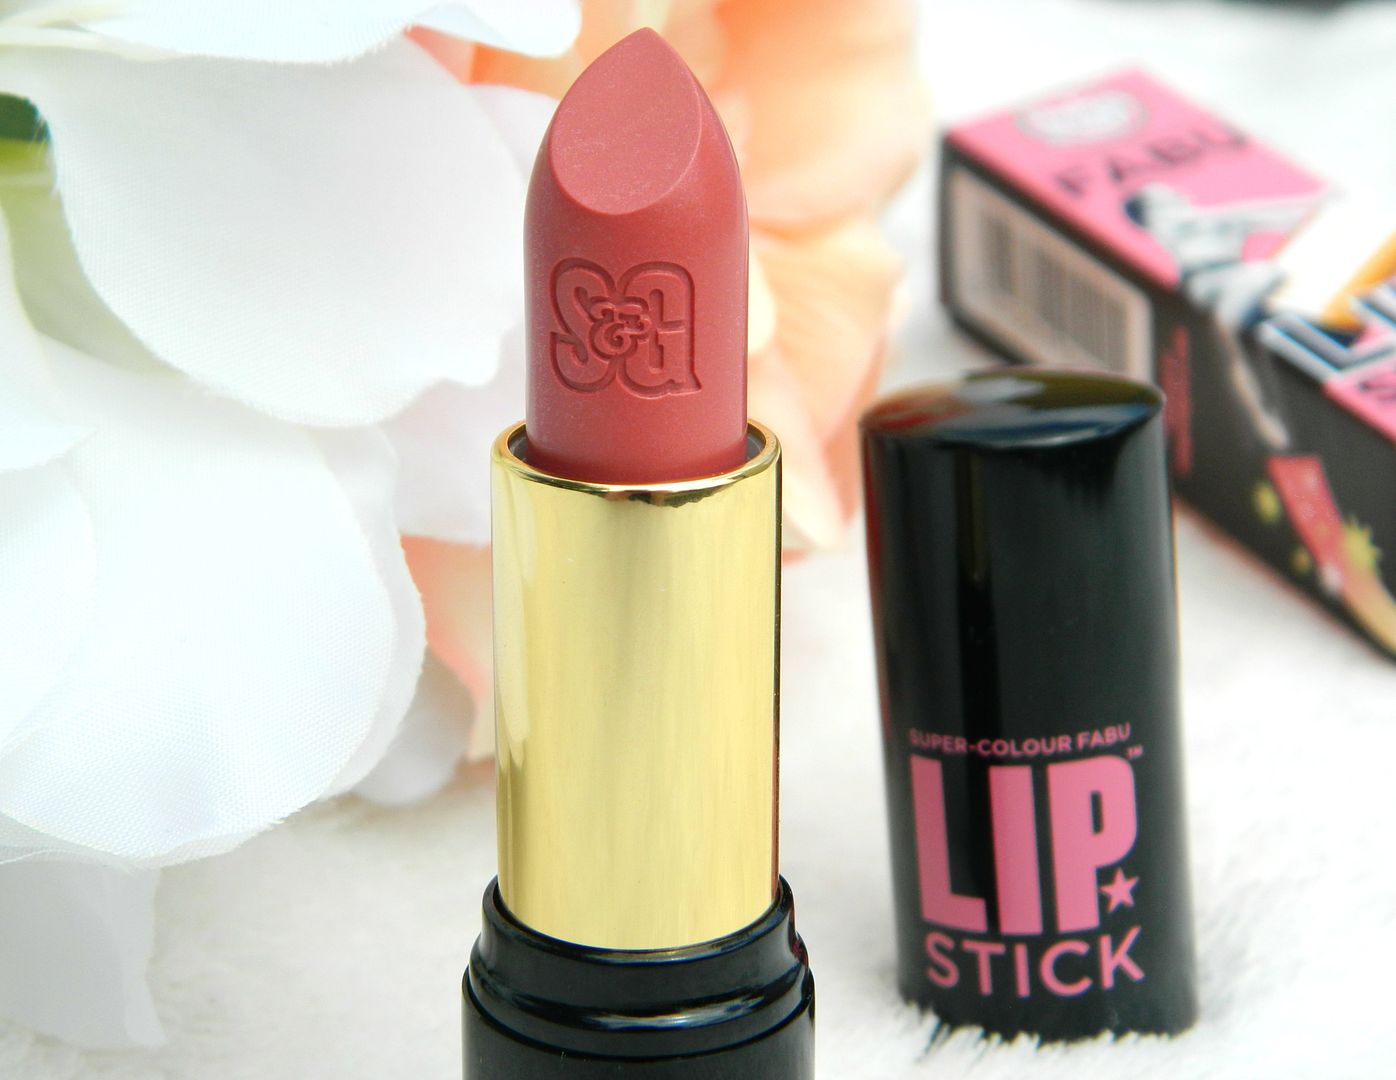 Soap And Glory Super Colour Fabu Lipstick In The Missing Pink Satin Finish Review In The Tube Bullet Embossed SG Belle Amie UK Beauty Fashion Lifestyle Blog